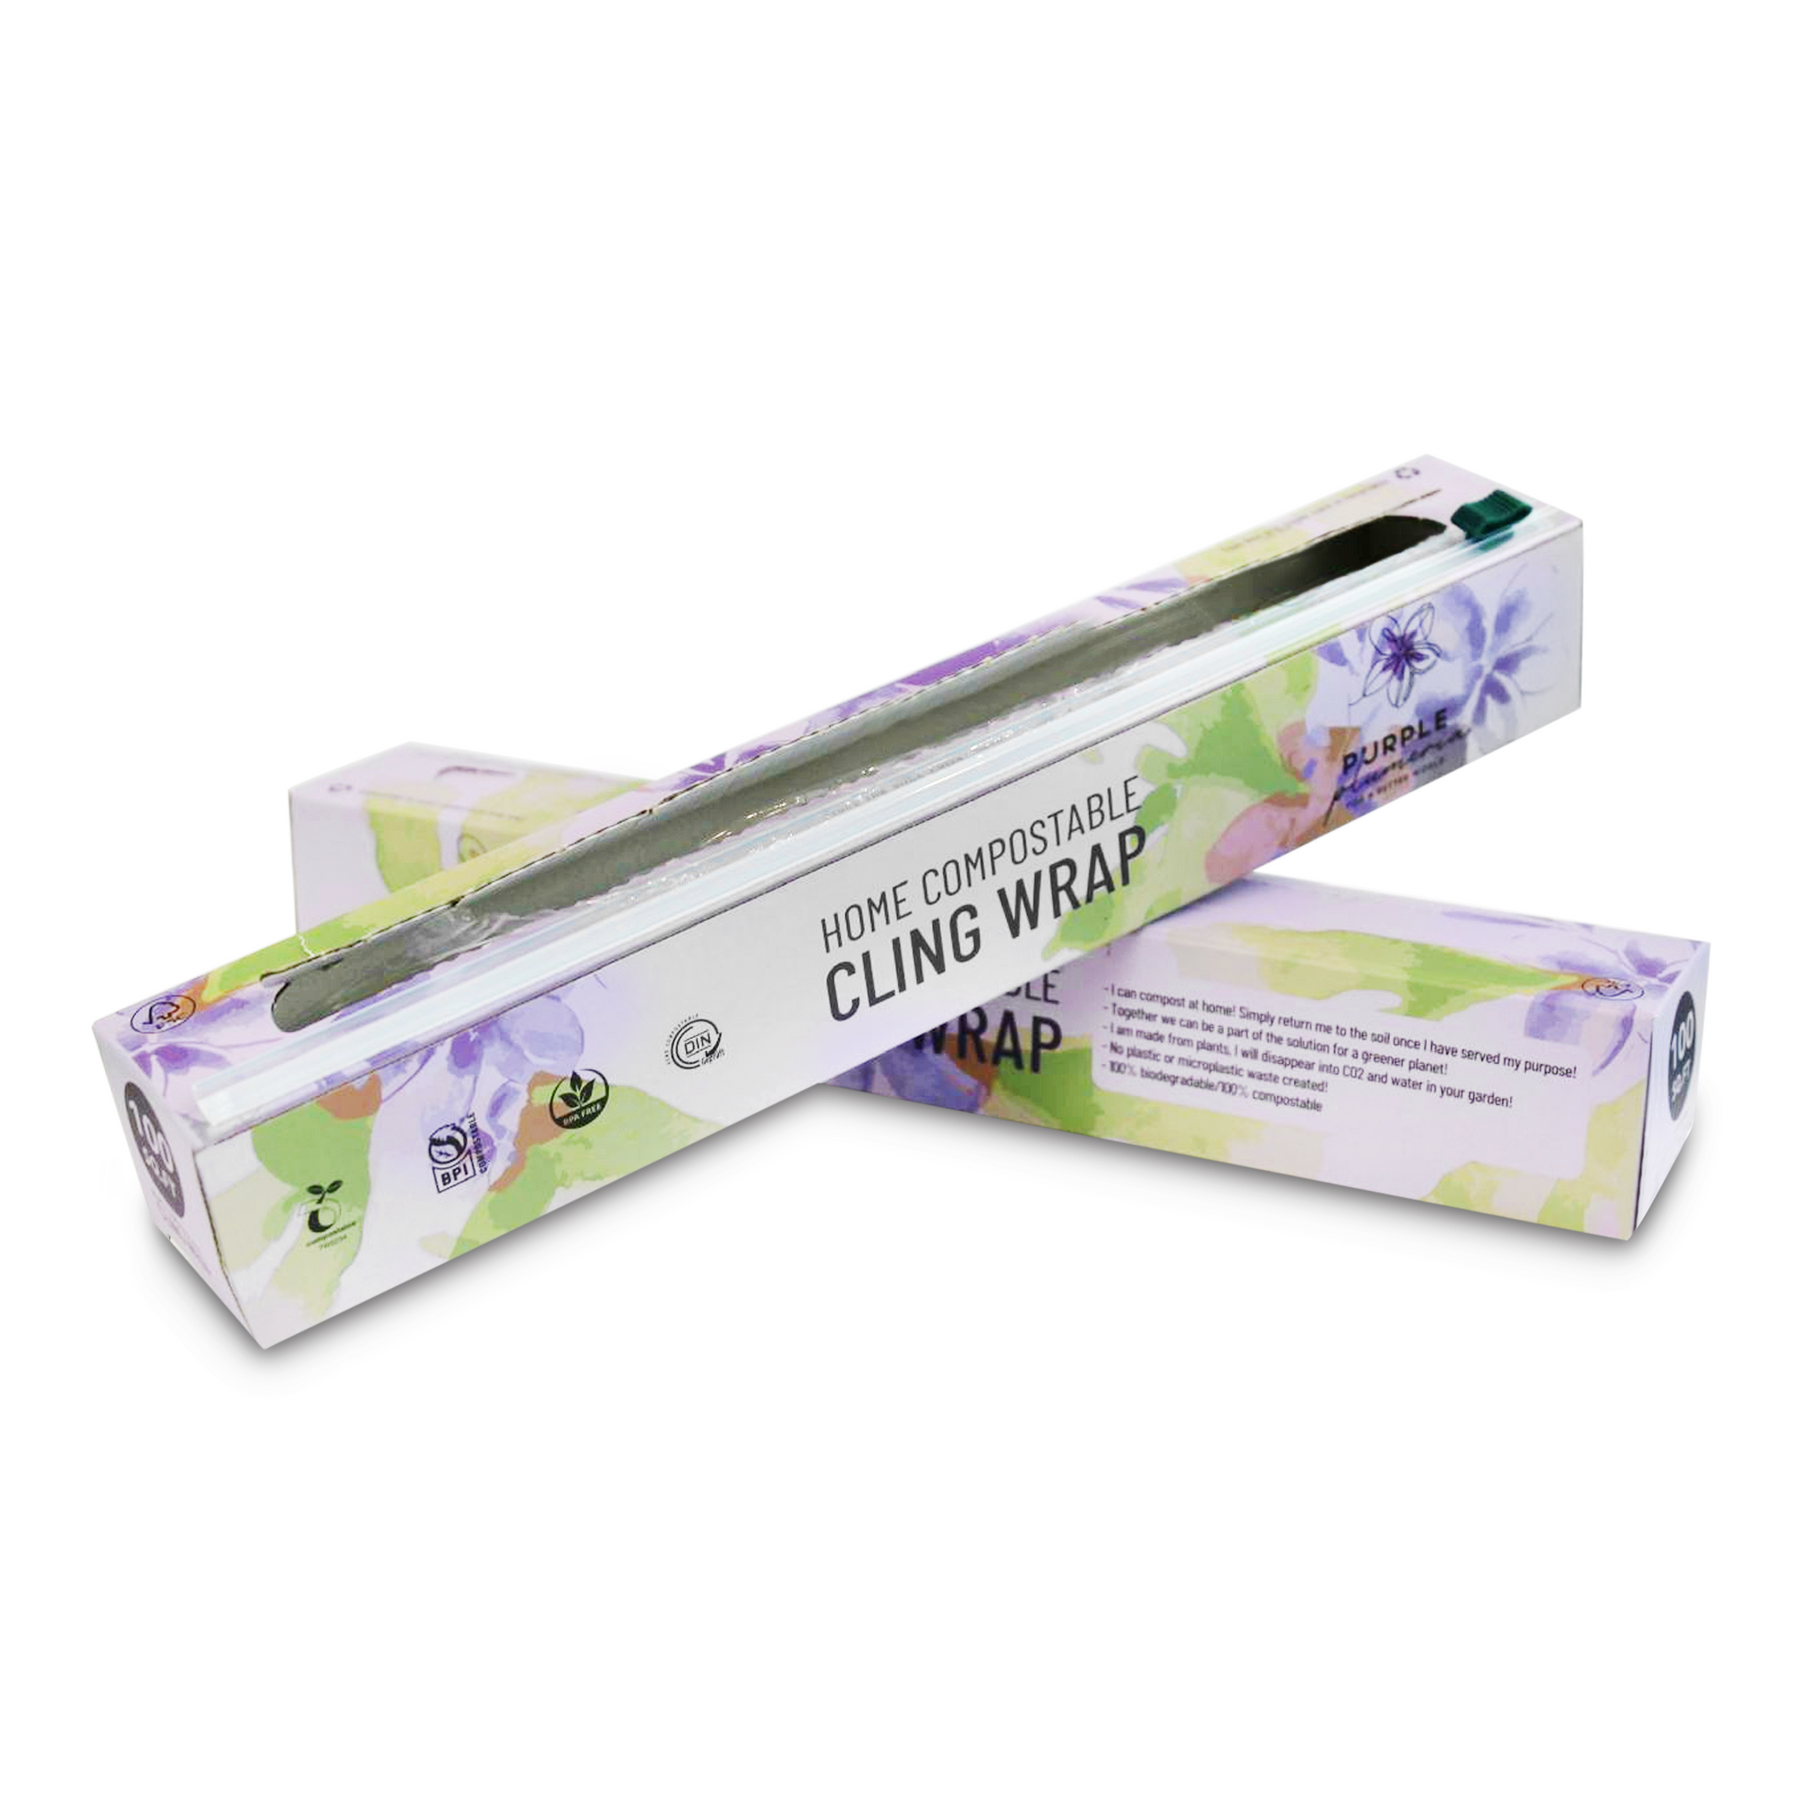 100% Home Compostable Cling Wrap 30m - White Magic